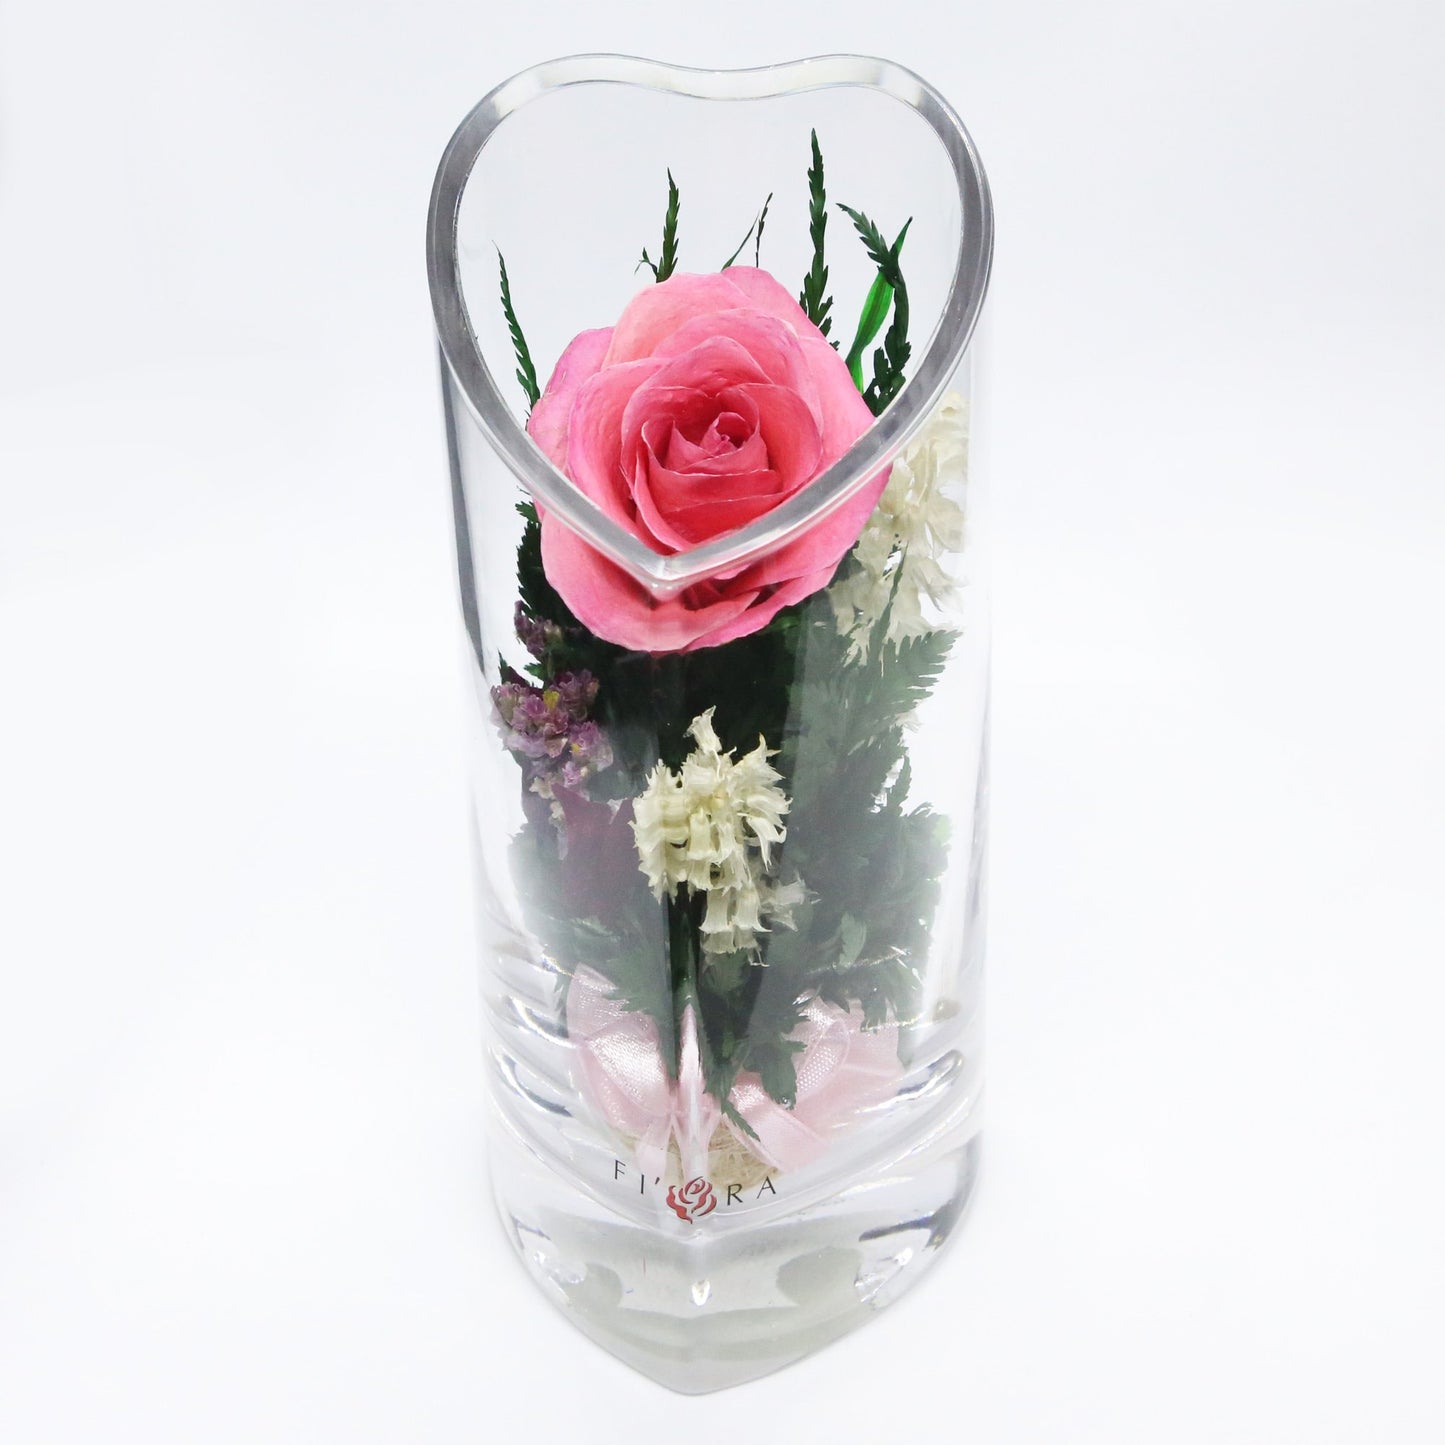 57342 Long-Lasting Pink Rose with White Limoniums and Greenery in a Heart-Shaped  Vase - FIORA FLOWER